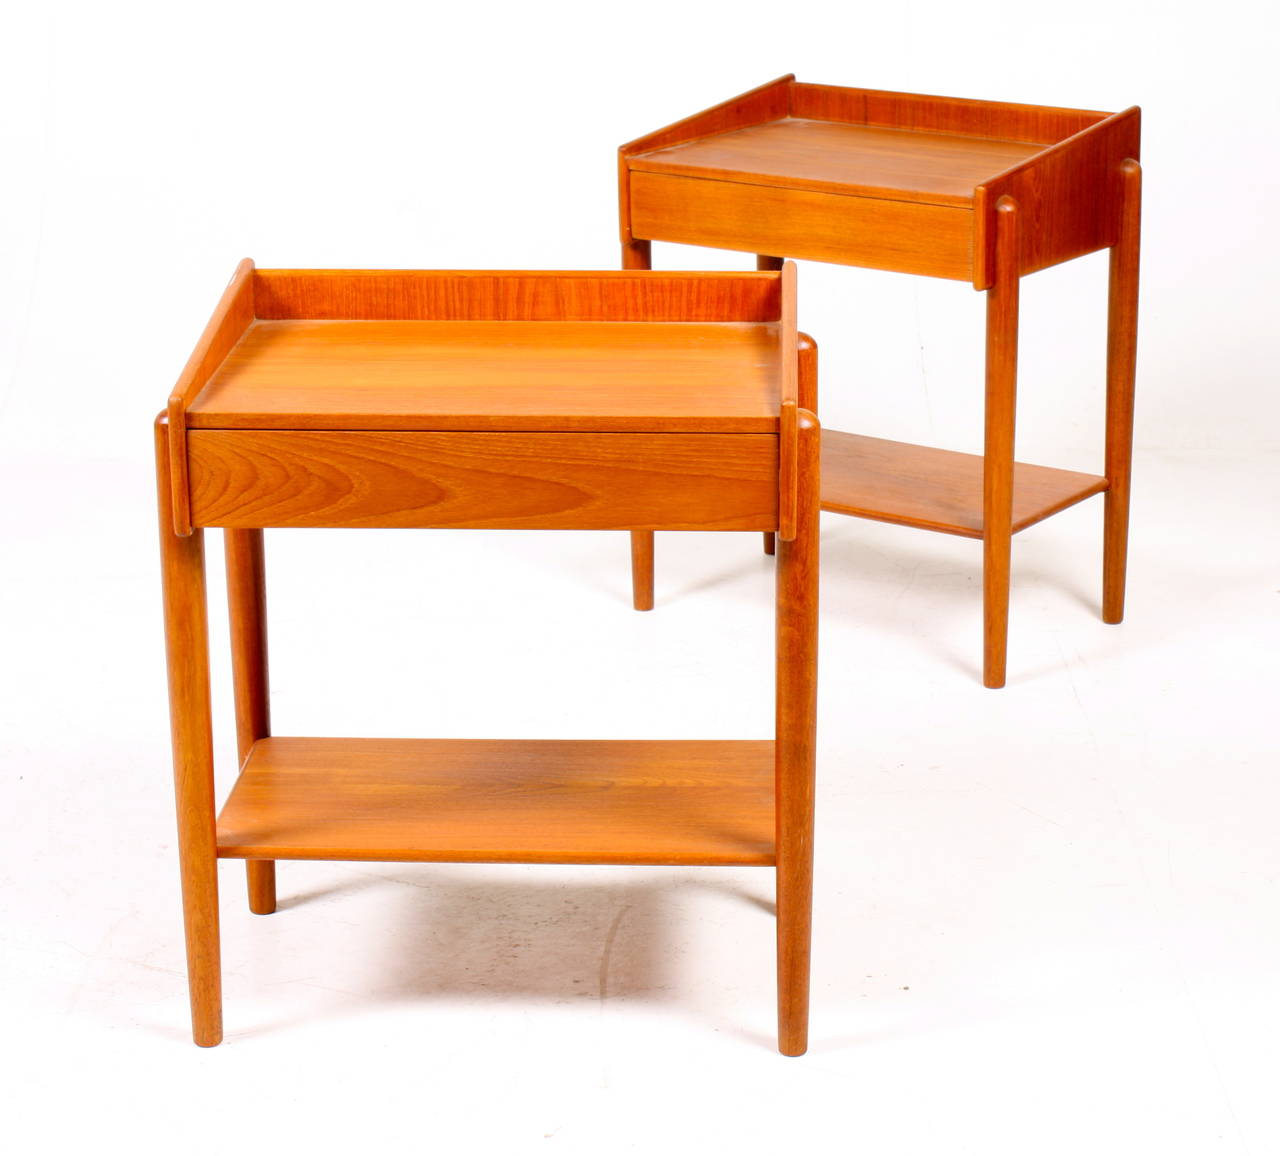 Pair of nightstands in teak, designed by Maa. Børge Mogensen and made by Søborg furniture, Denmark in the 1950s. Great original condition.